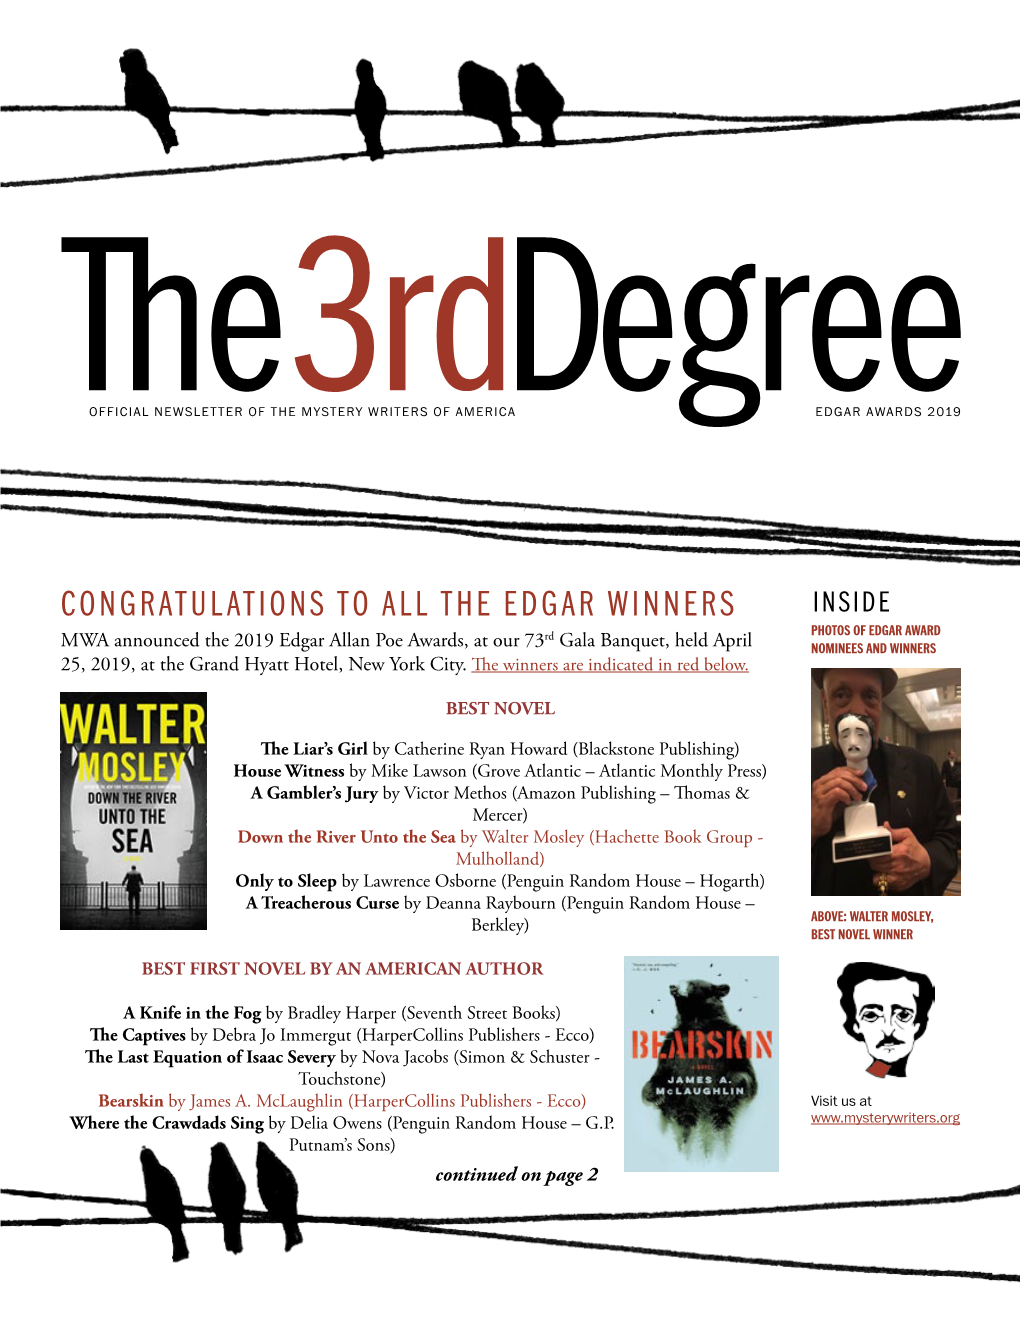 Congratulations to All the Edgar Winners